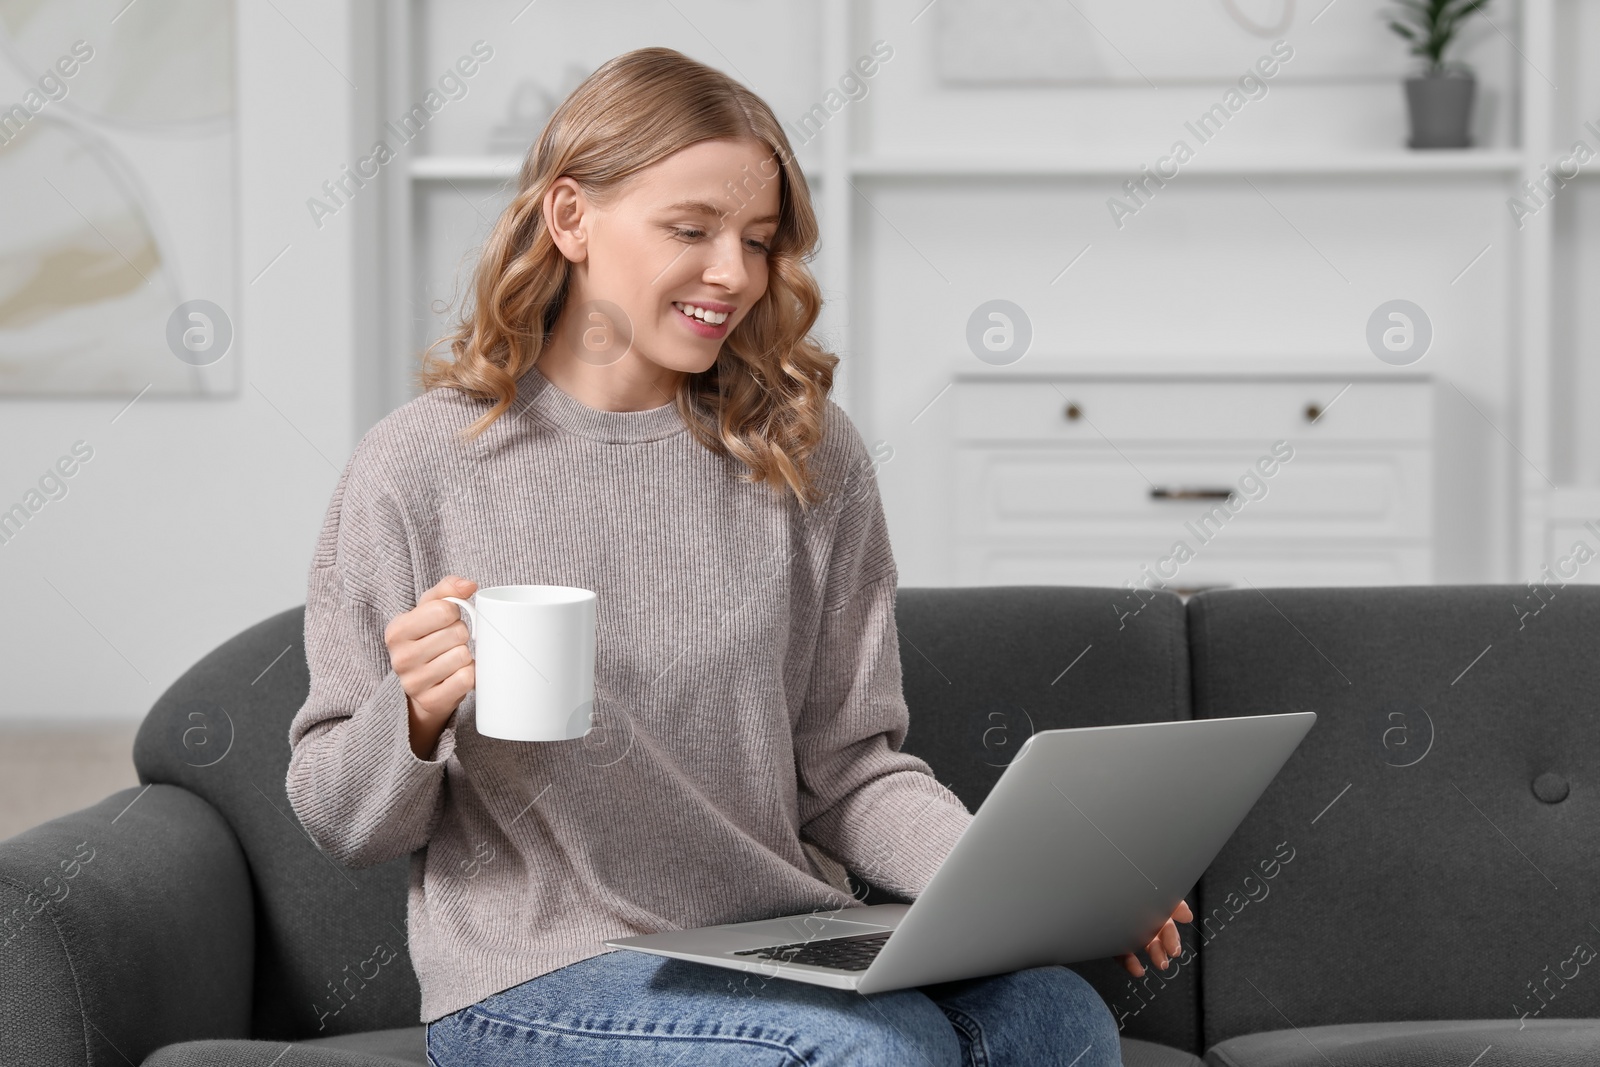 Photo of Beautiful woman with blonde hair holding cup and laptop on sofa indoors. Space for text